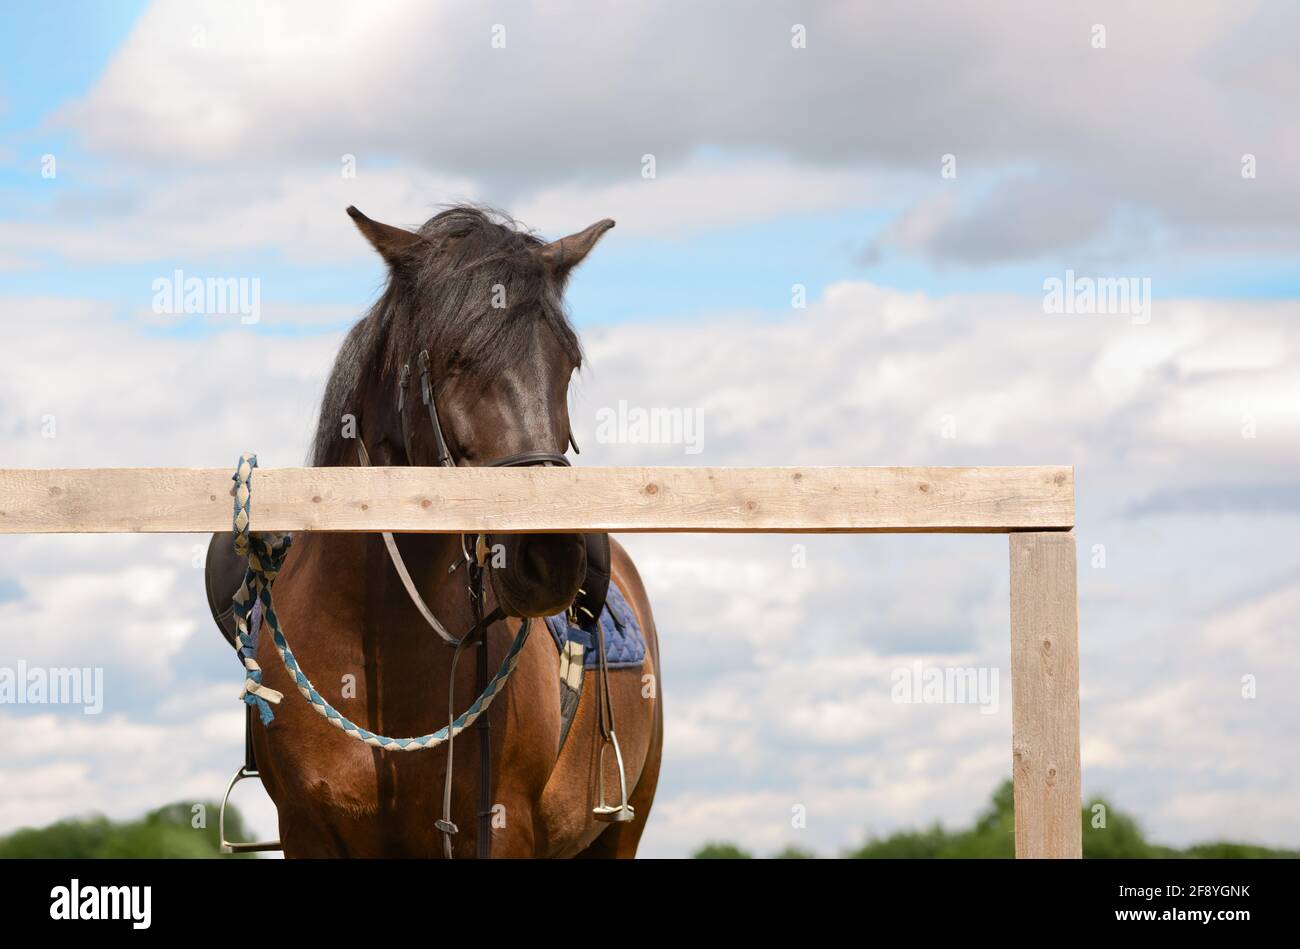 One saddled horse is standing at a wooden hitching post. Stock Photo